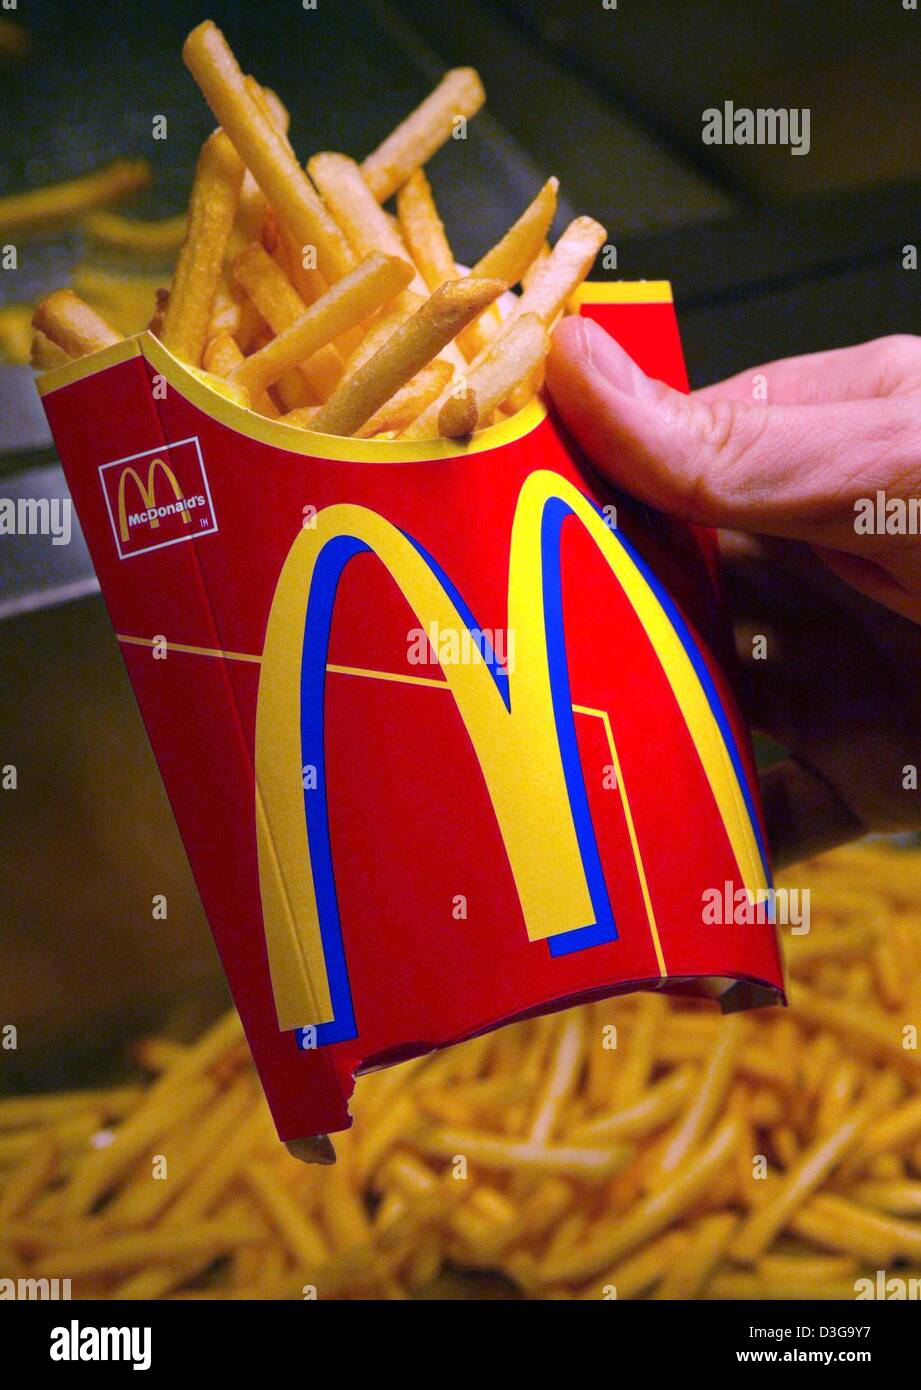 (dpa files) - A serving of french fries is prepared by an employee at a McDonald's fast food restaurant in Munich, Germany, 1 March 2004. After decreasing 2003 profits McDonald's, which operates more than 1,200 restaurants in Germany, was able to record a small increase in early 2004 due to a revamped menue and agressive marketing. Stock Photo